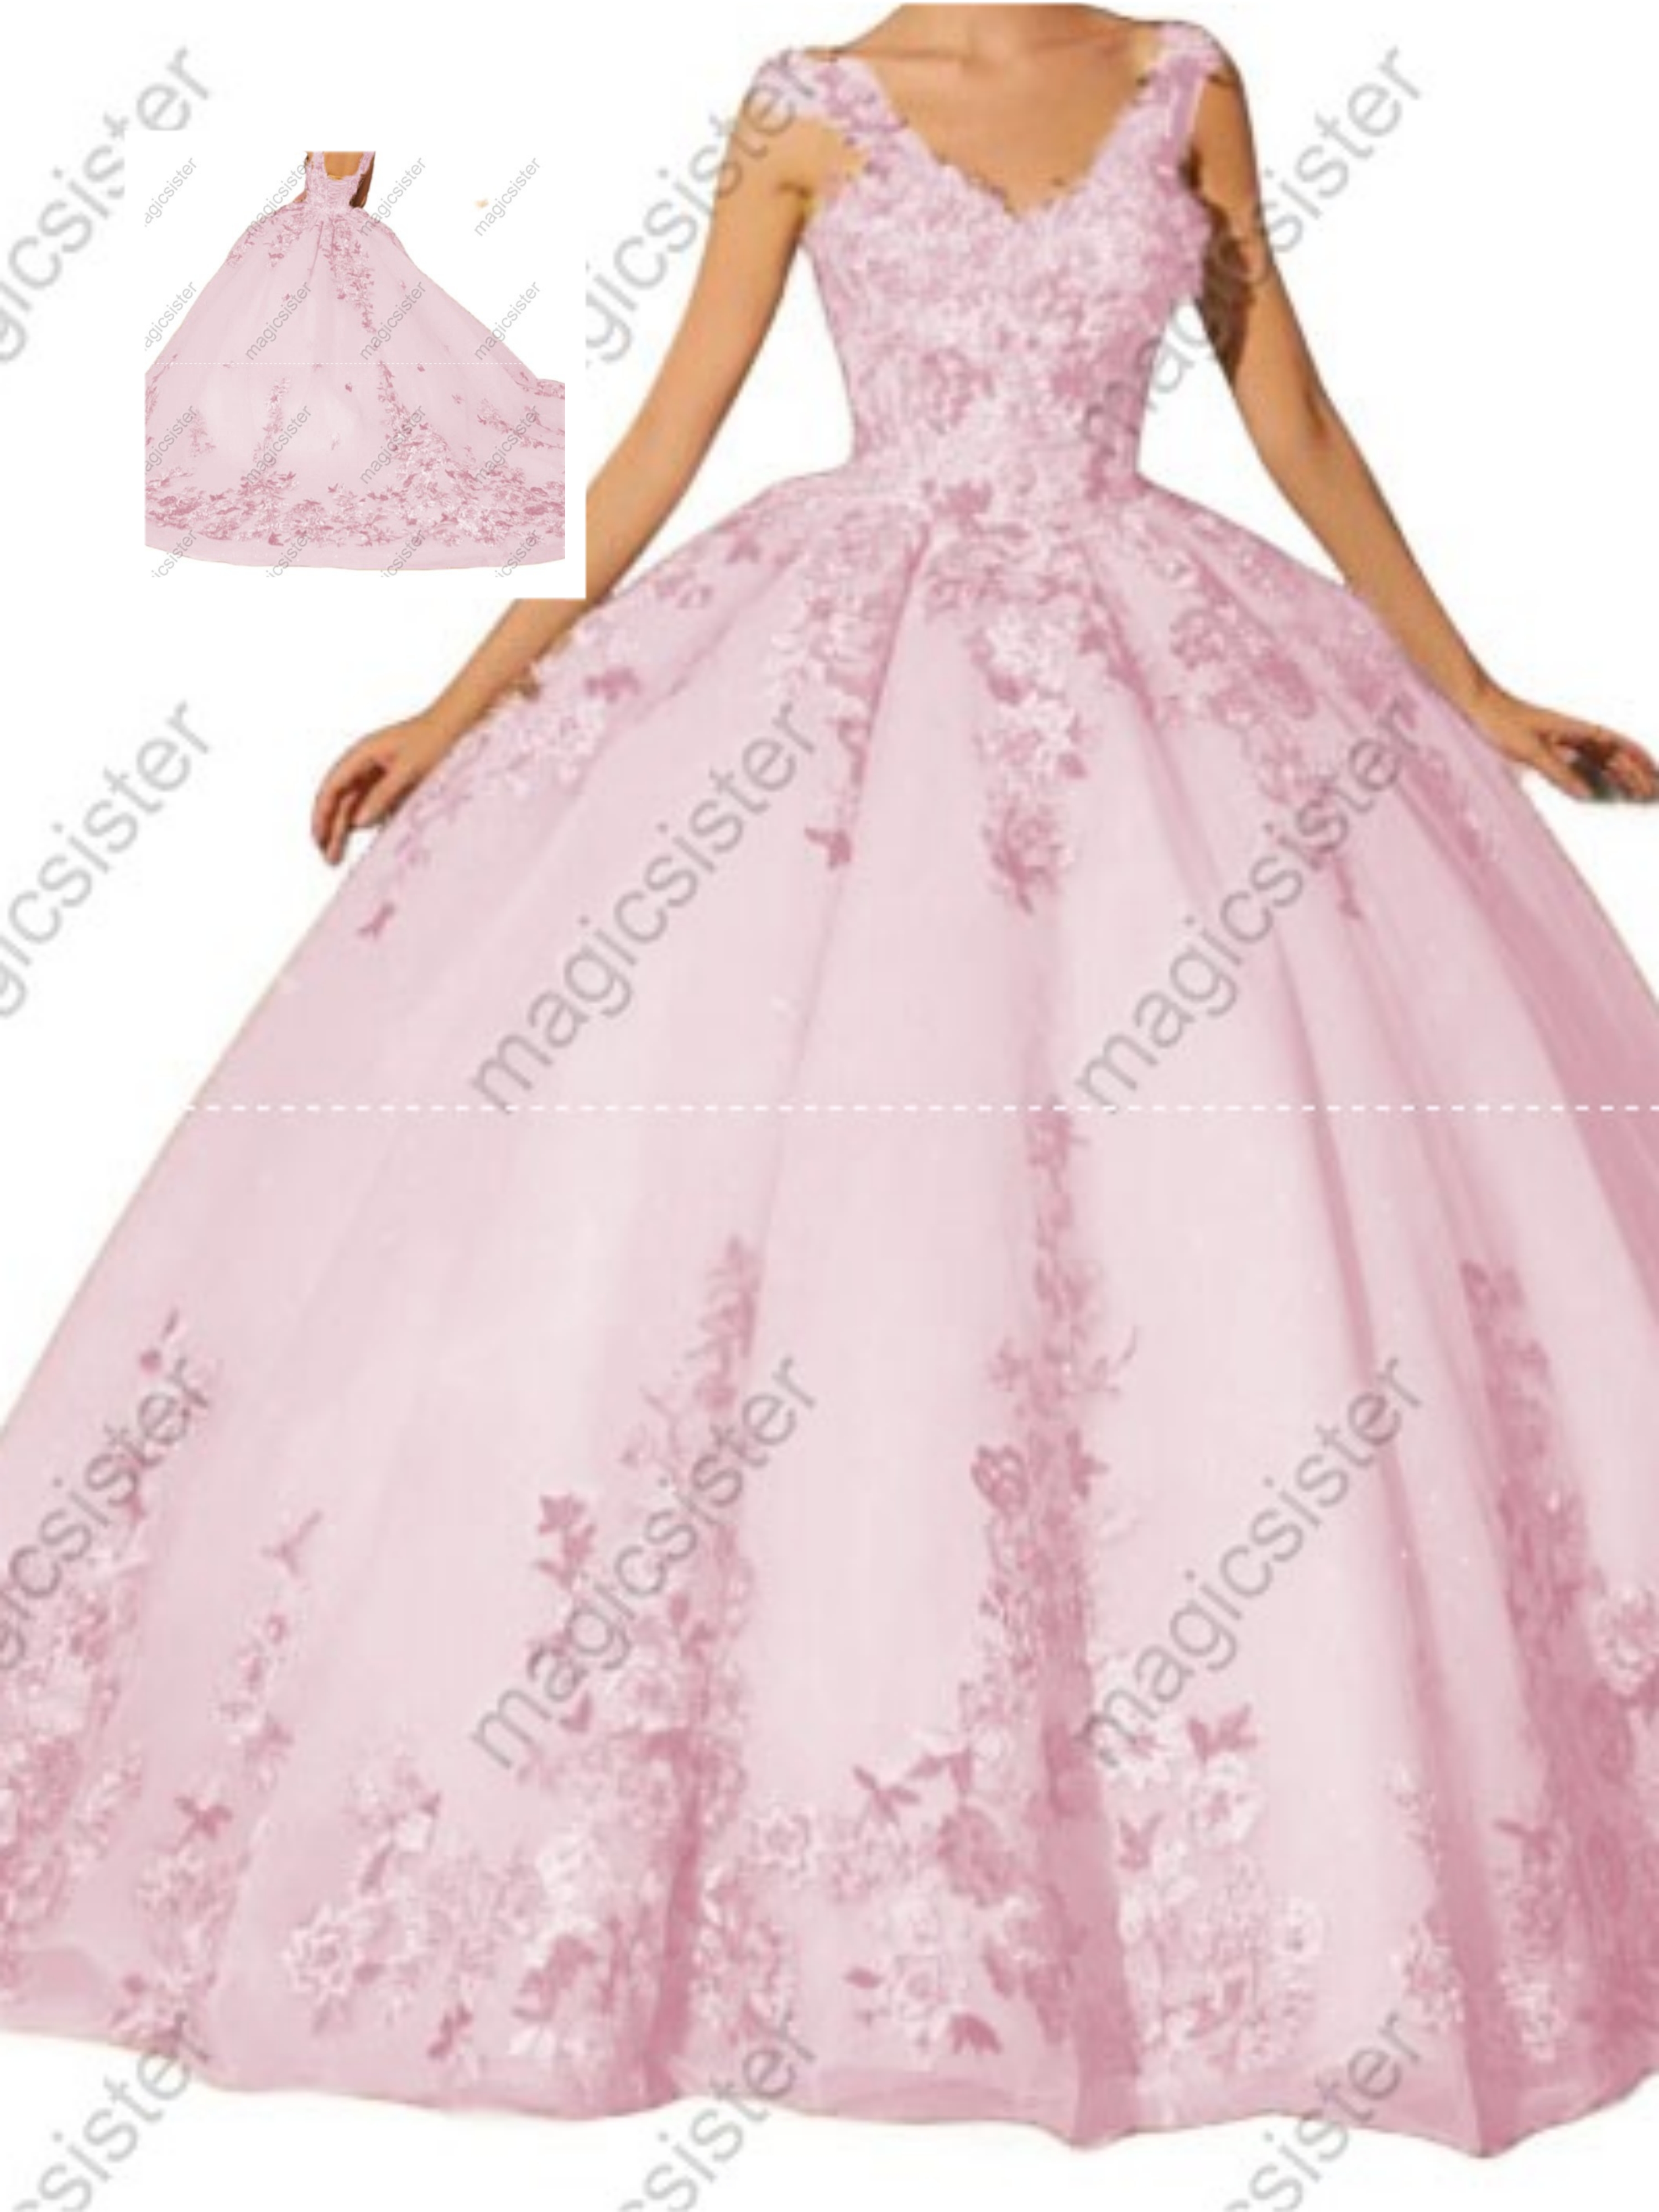 Blush Instock Factory Multicolor Embroidered Floral Quinceanera Dress